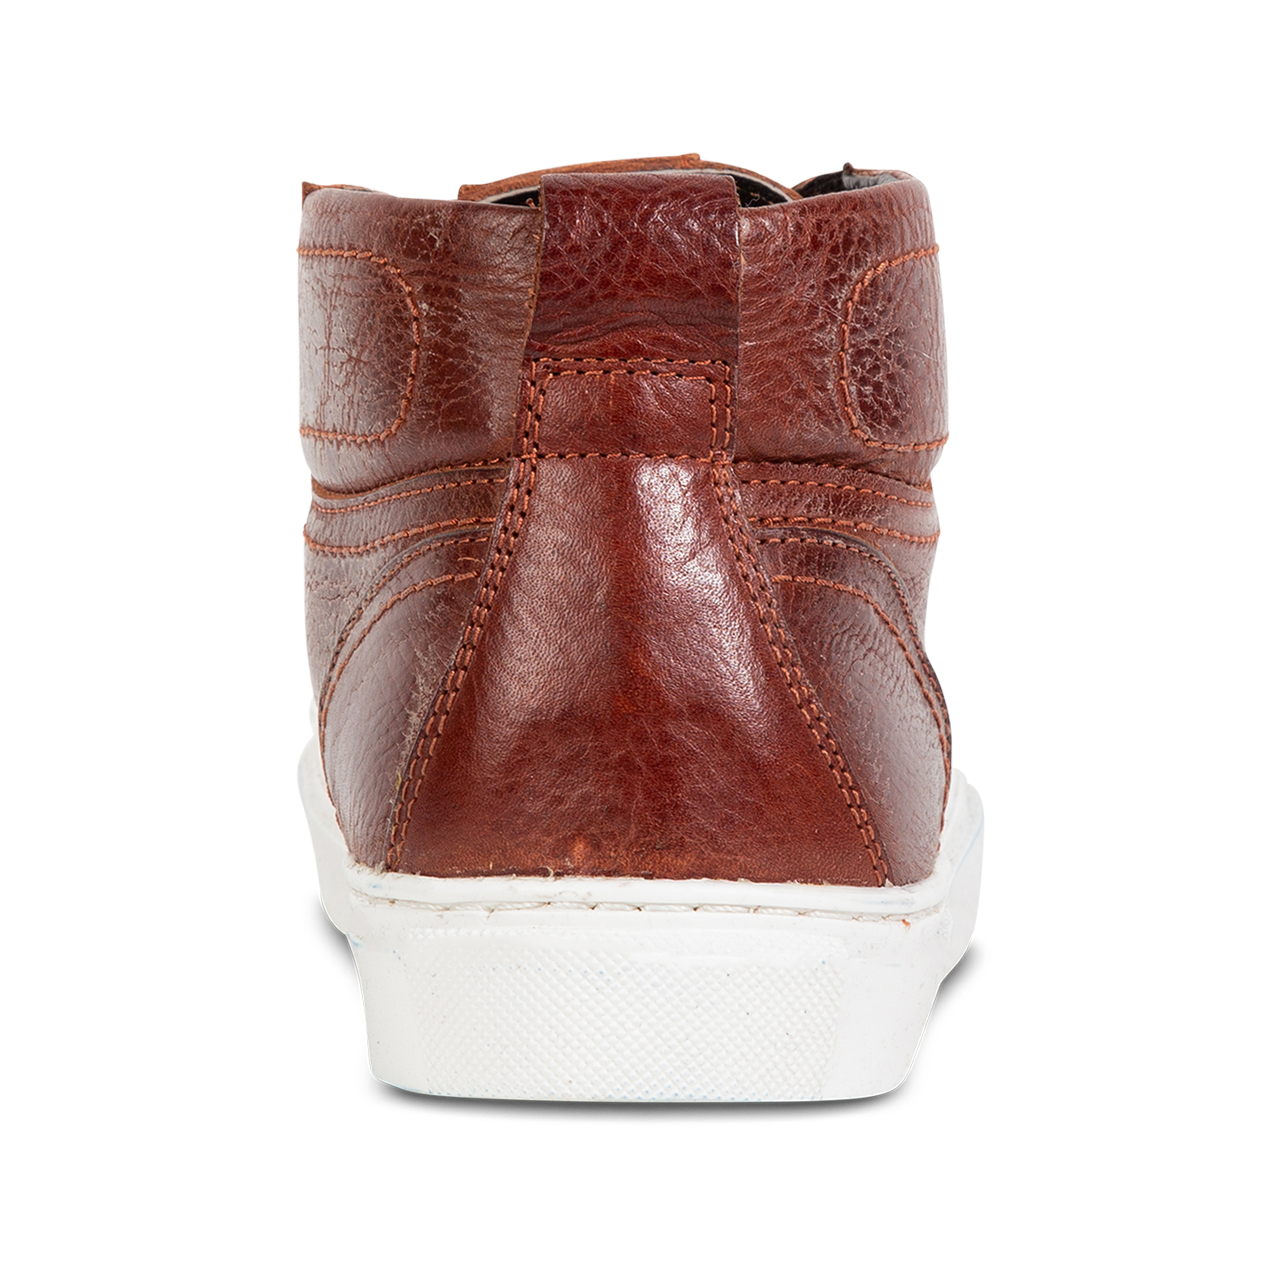 Back view showing low ankle construction on FREEBIRD men's Shelby wine shoe